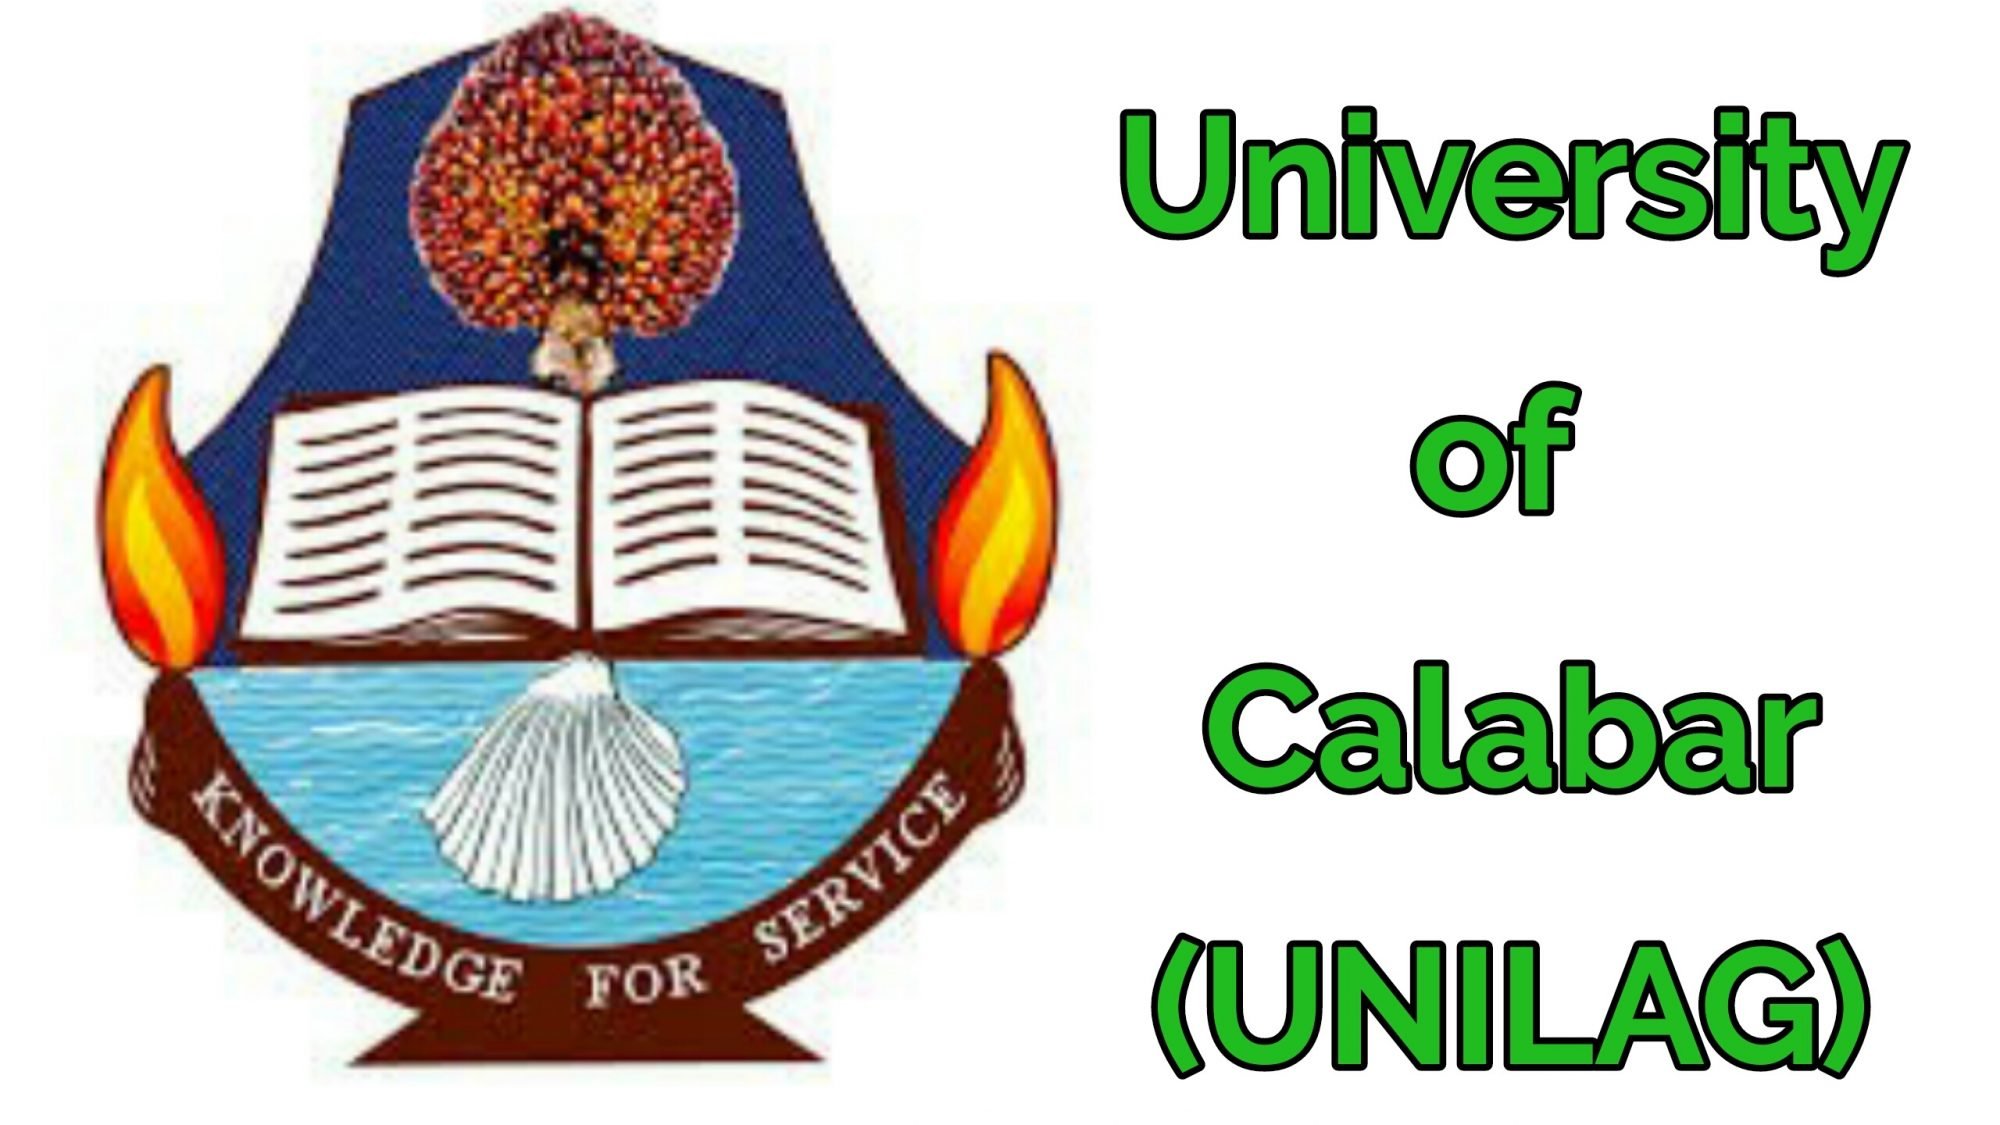 UNICAL Departmental Cutoff Marks For 2022/2023 Academic Session